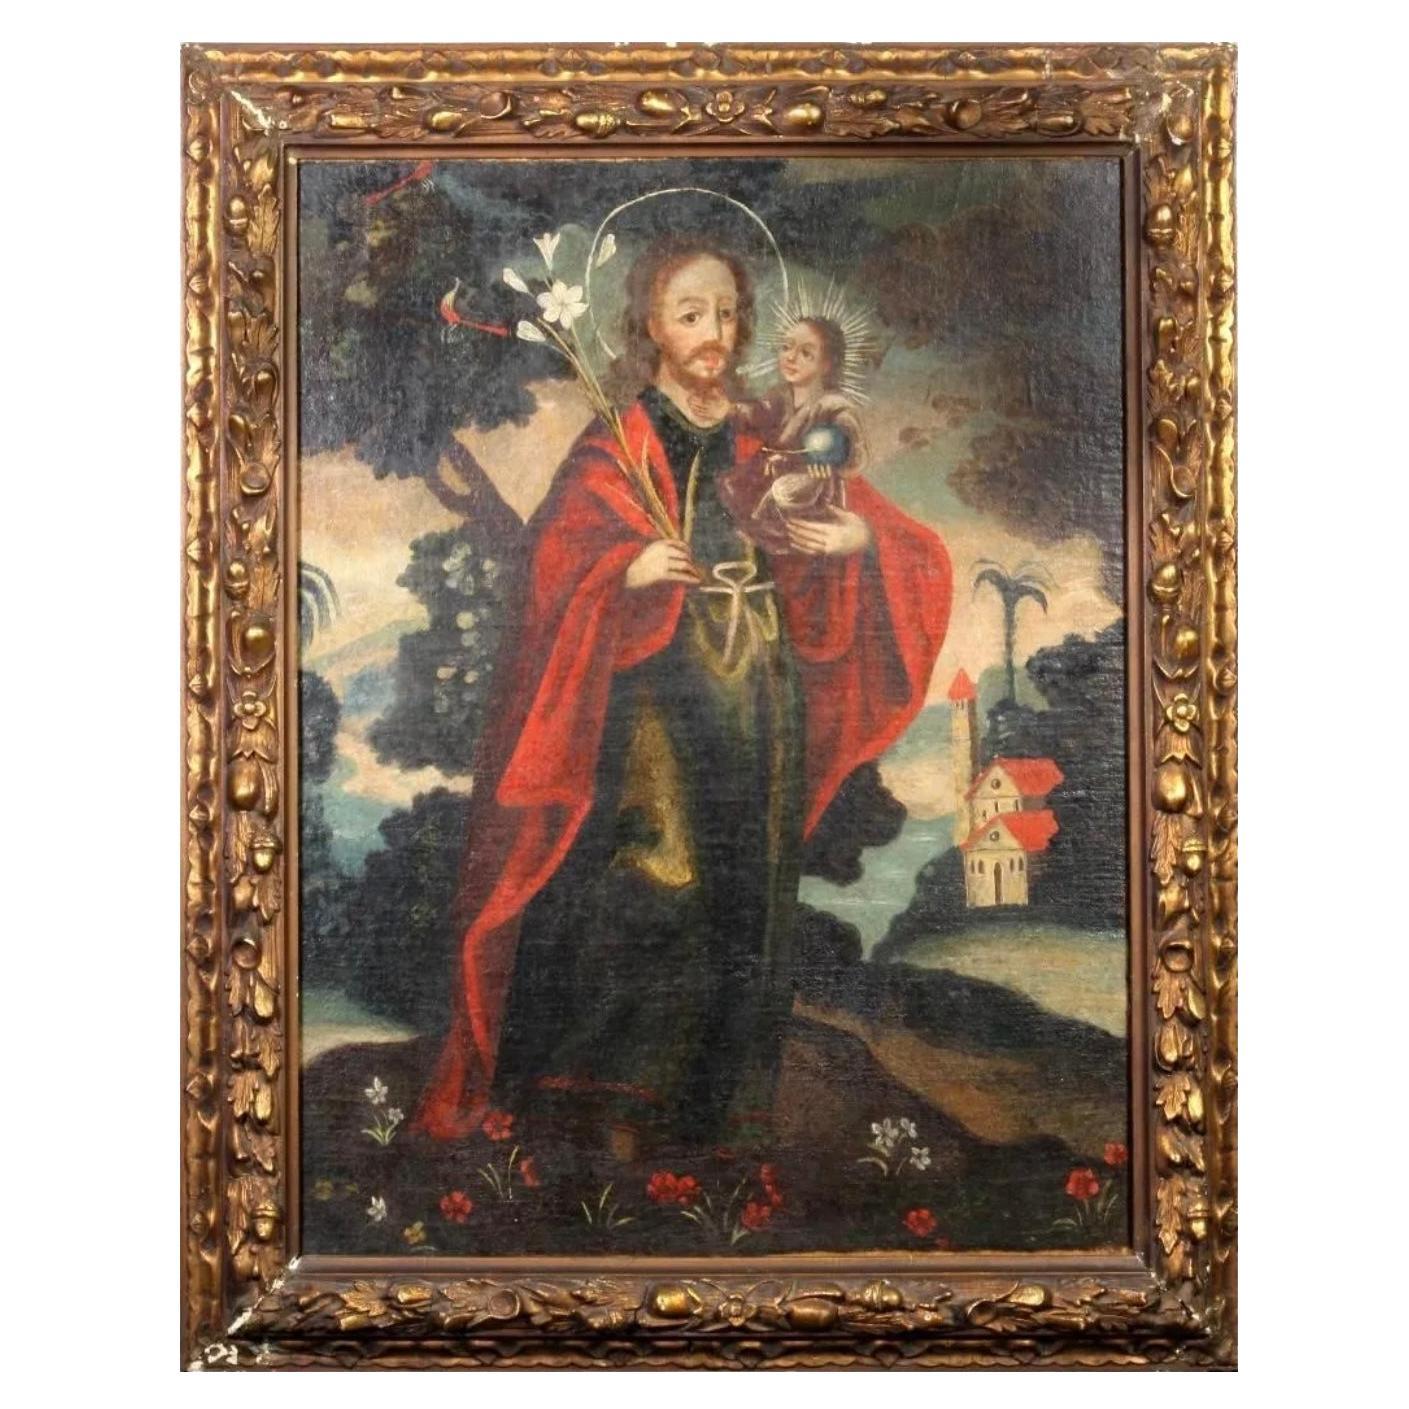 18th century oil on canvas, St. Joseph with Christ child. 
The unidentified artist who painted this bucolic scene, dominated by the figure of the sixteenth-century Portuguese monk Saint John of God holding the infant Christ, was part of a